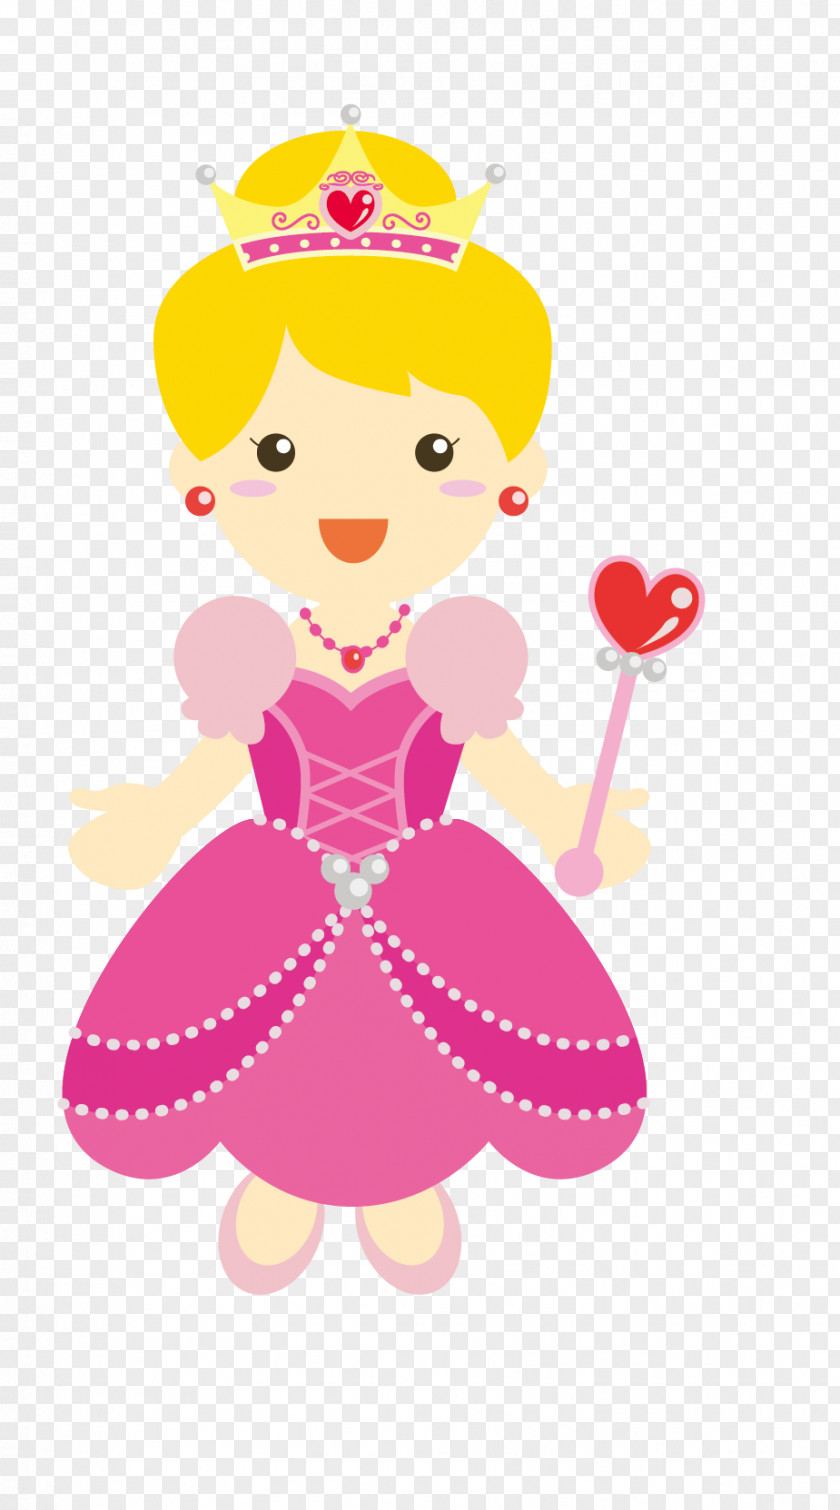 Vector Cute Crowned Princess France Drawing Illustration PNG